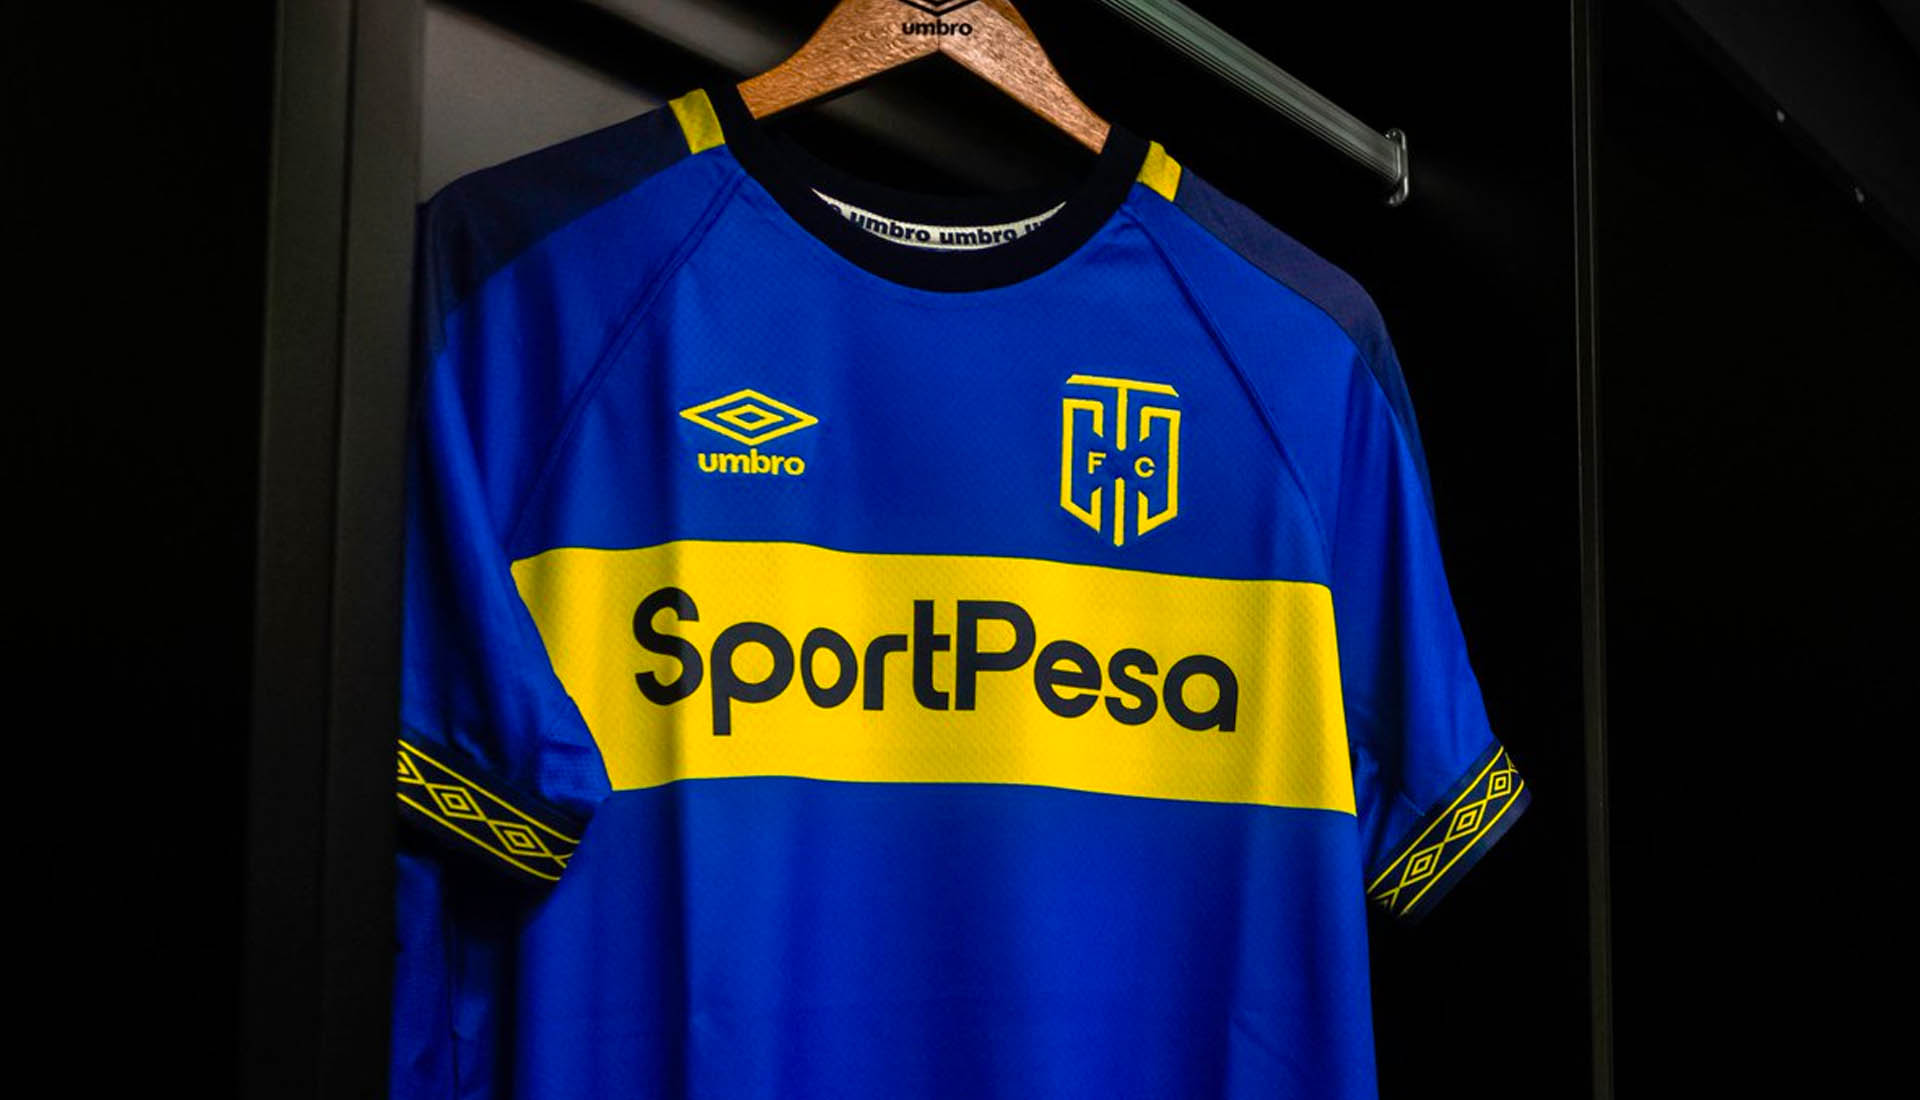 repertoire groef spontaan Cape Town City FC 2018 Home Kit by Umbro - SoccerBible